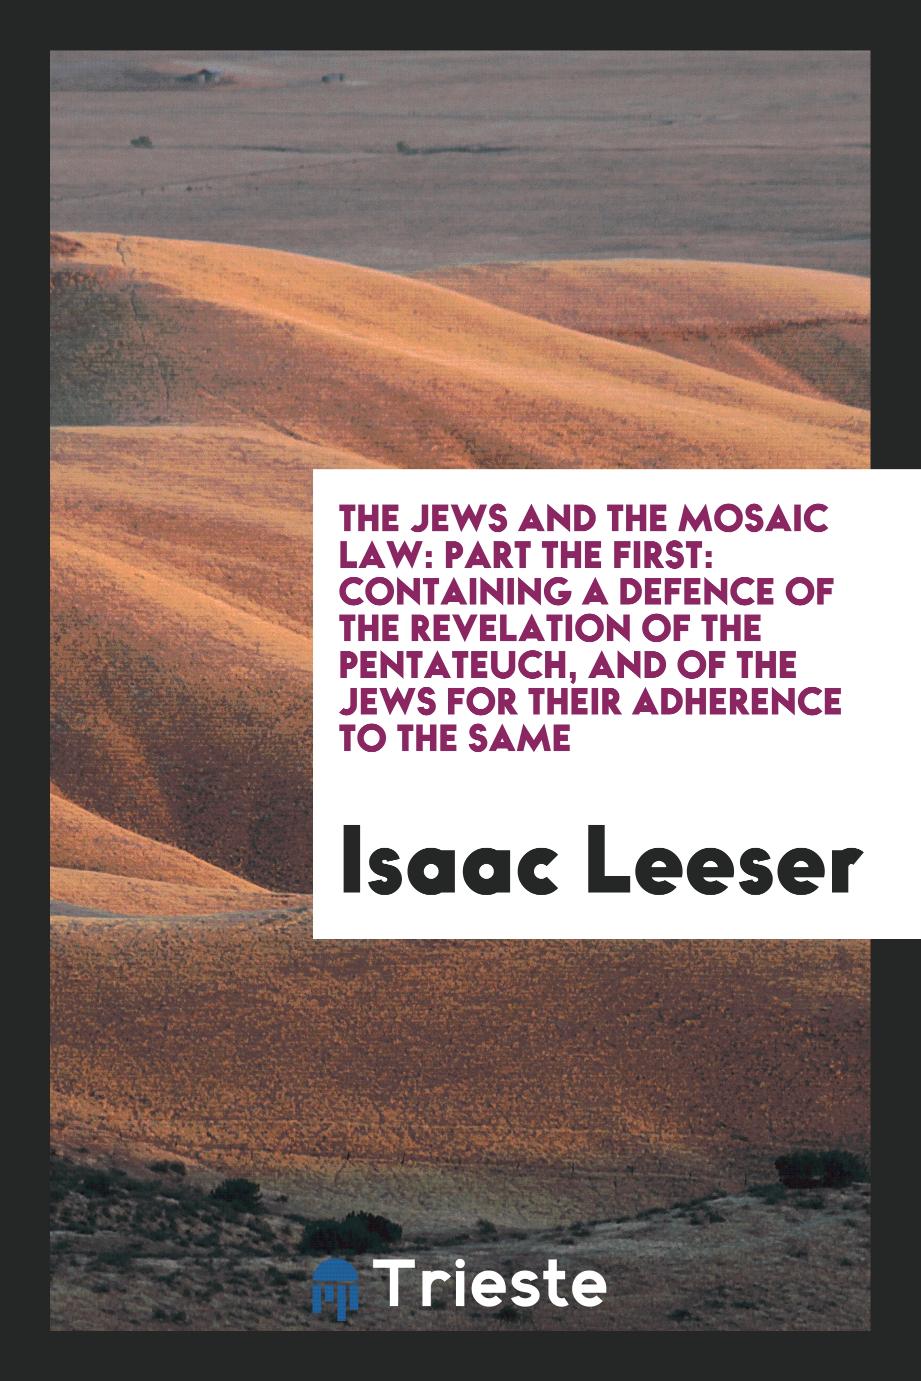 The Jews and the Mosaic Law: Part the First: Containing a Defence of the Revelation of the Pentateuch, and of the Jews for Their Adherence to the Same